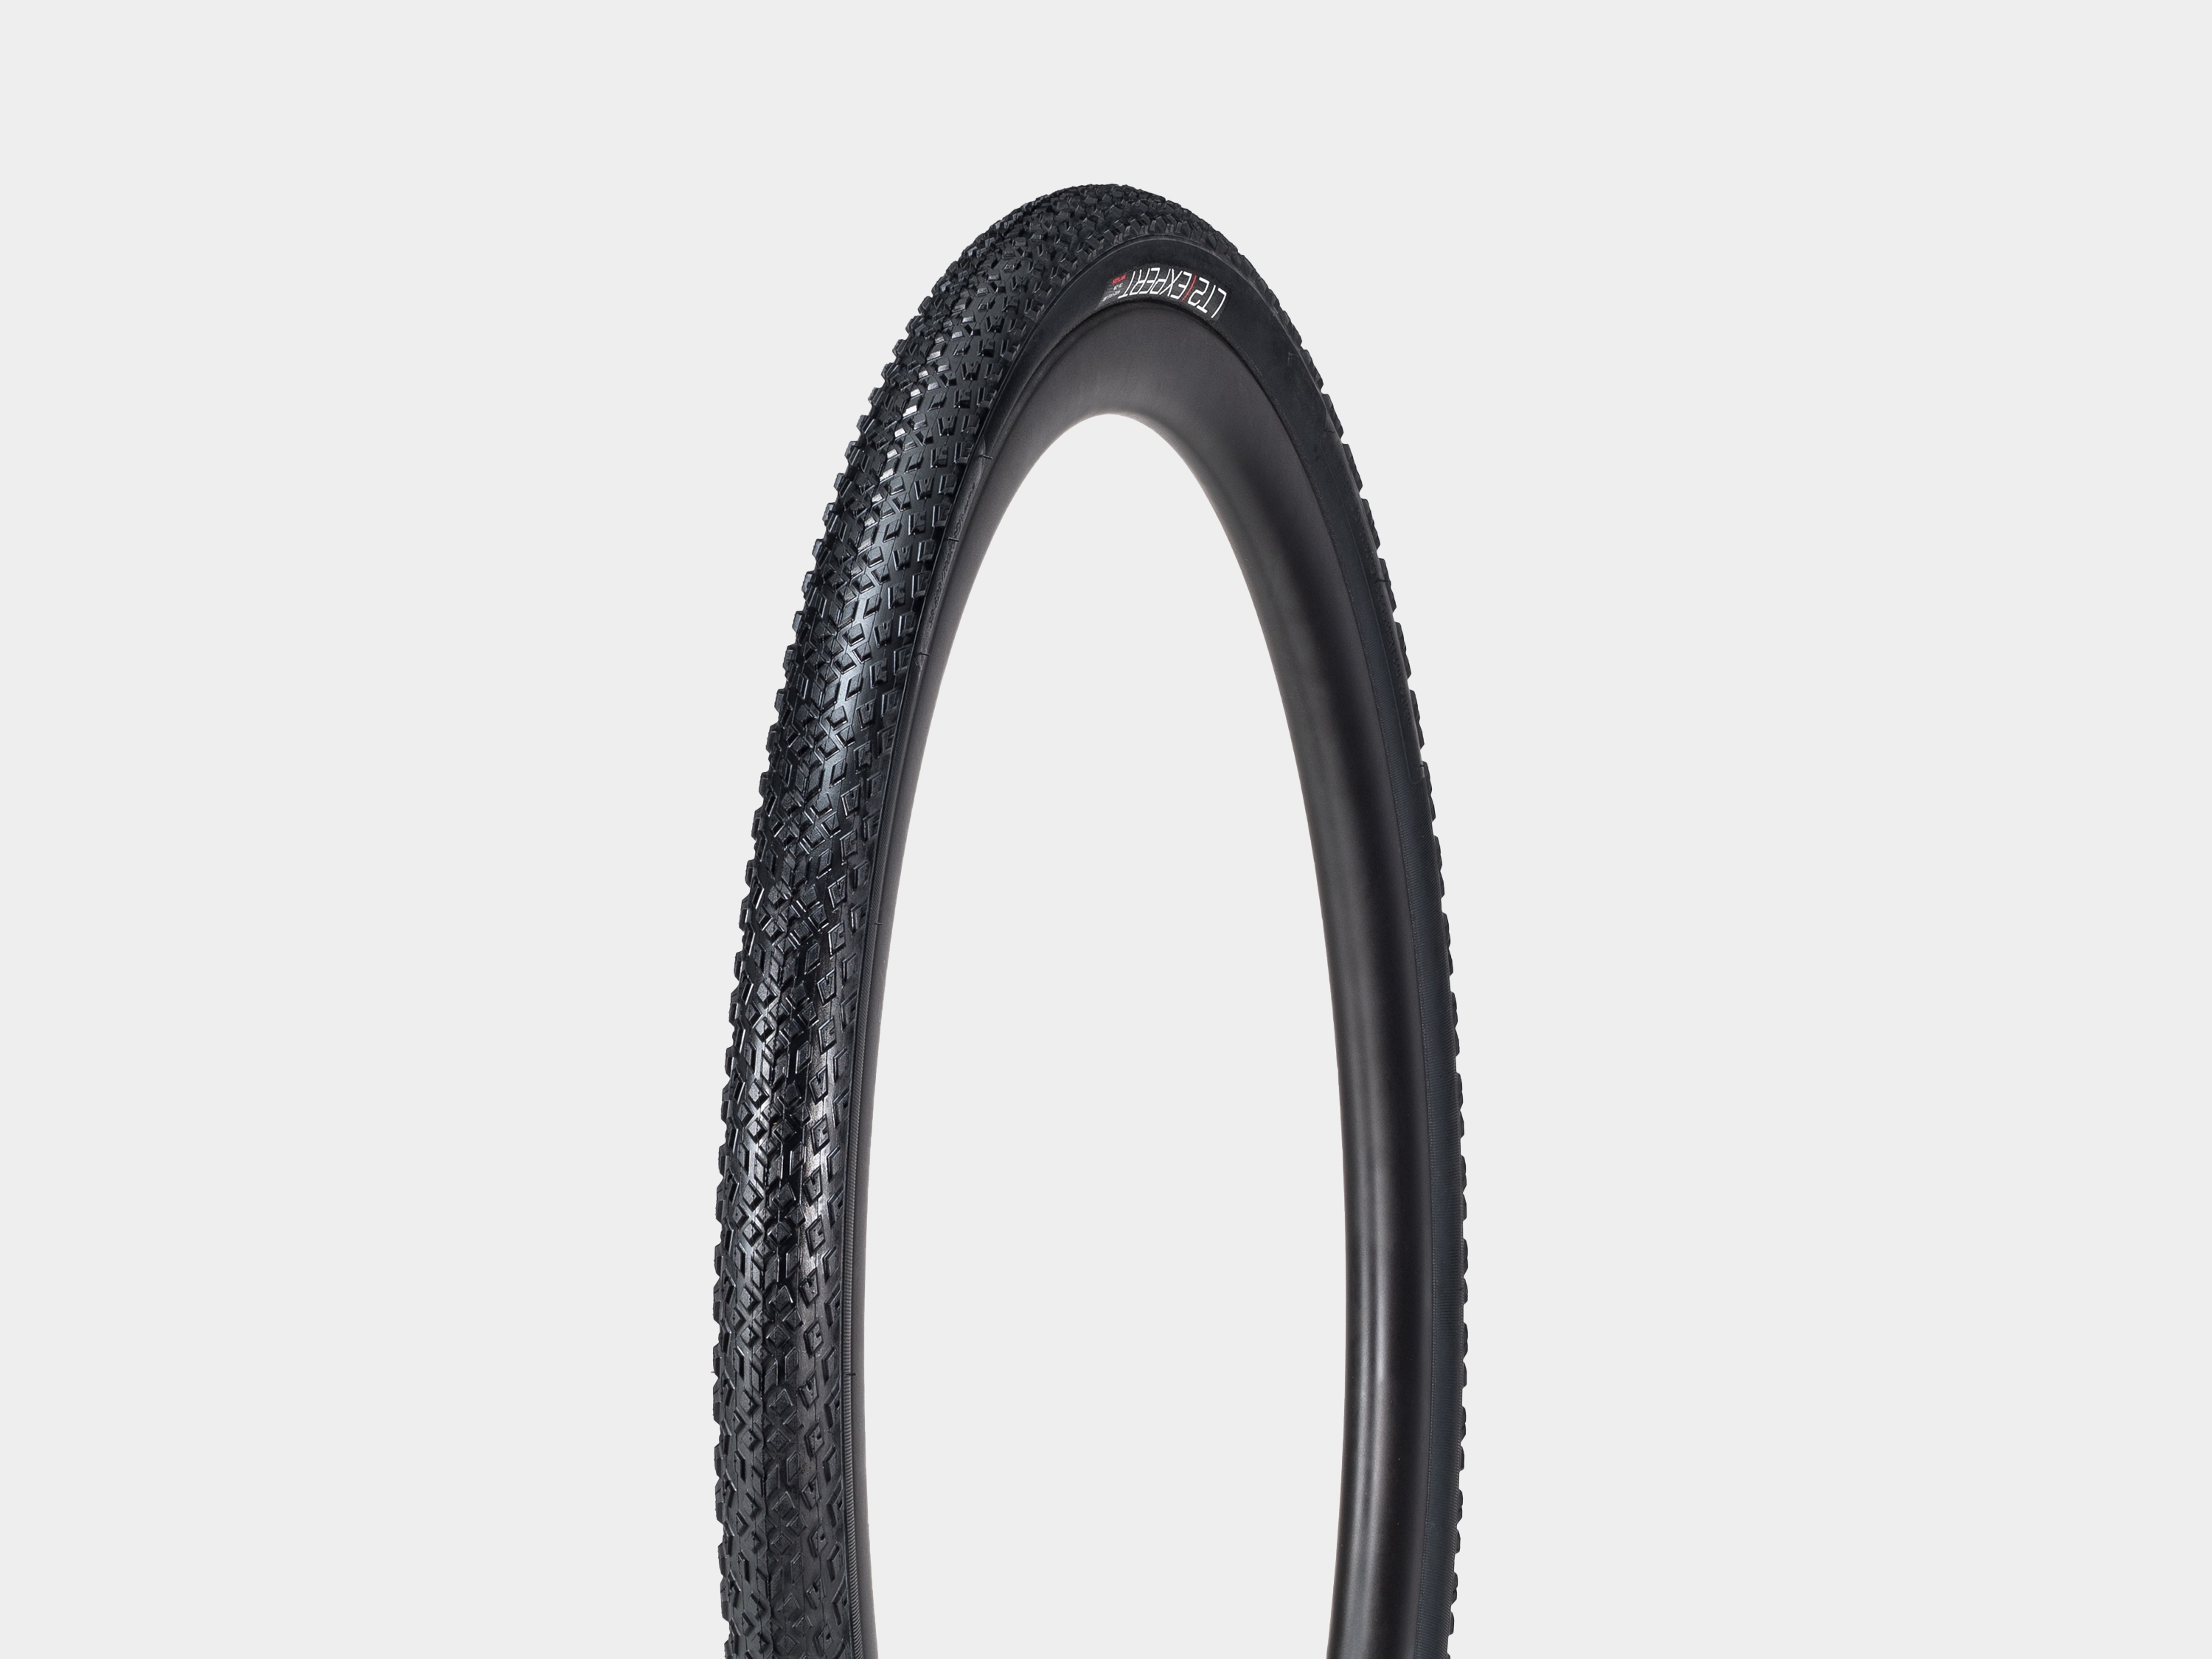 700 bicycle tires